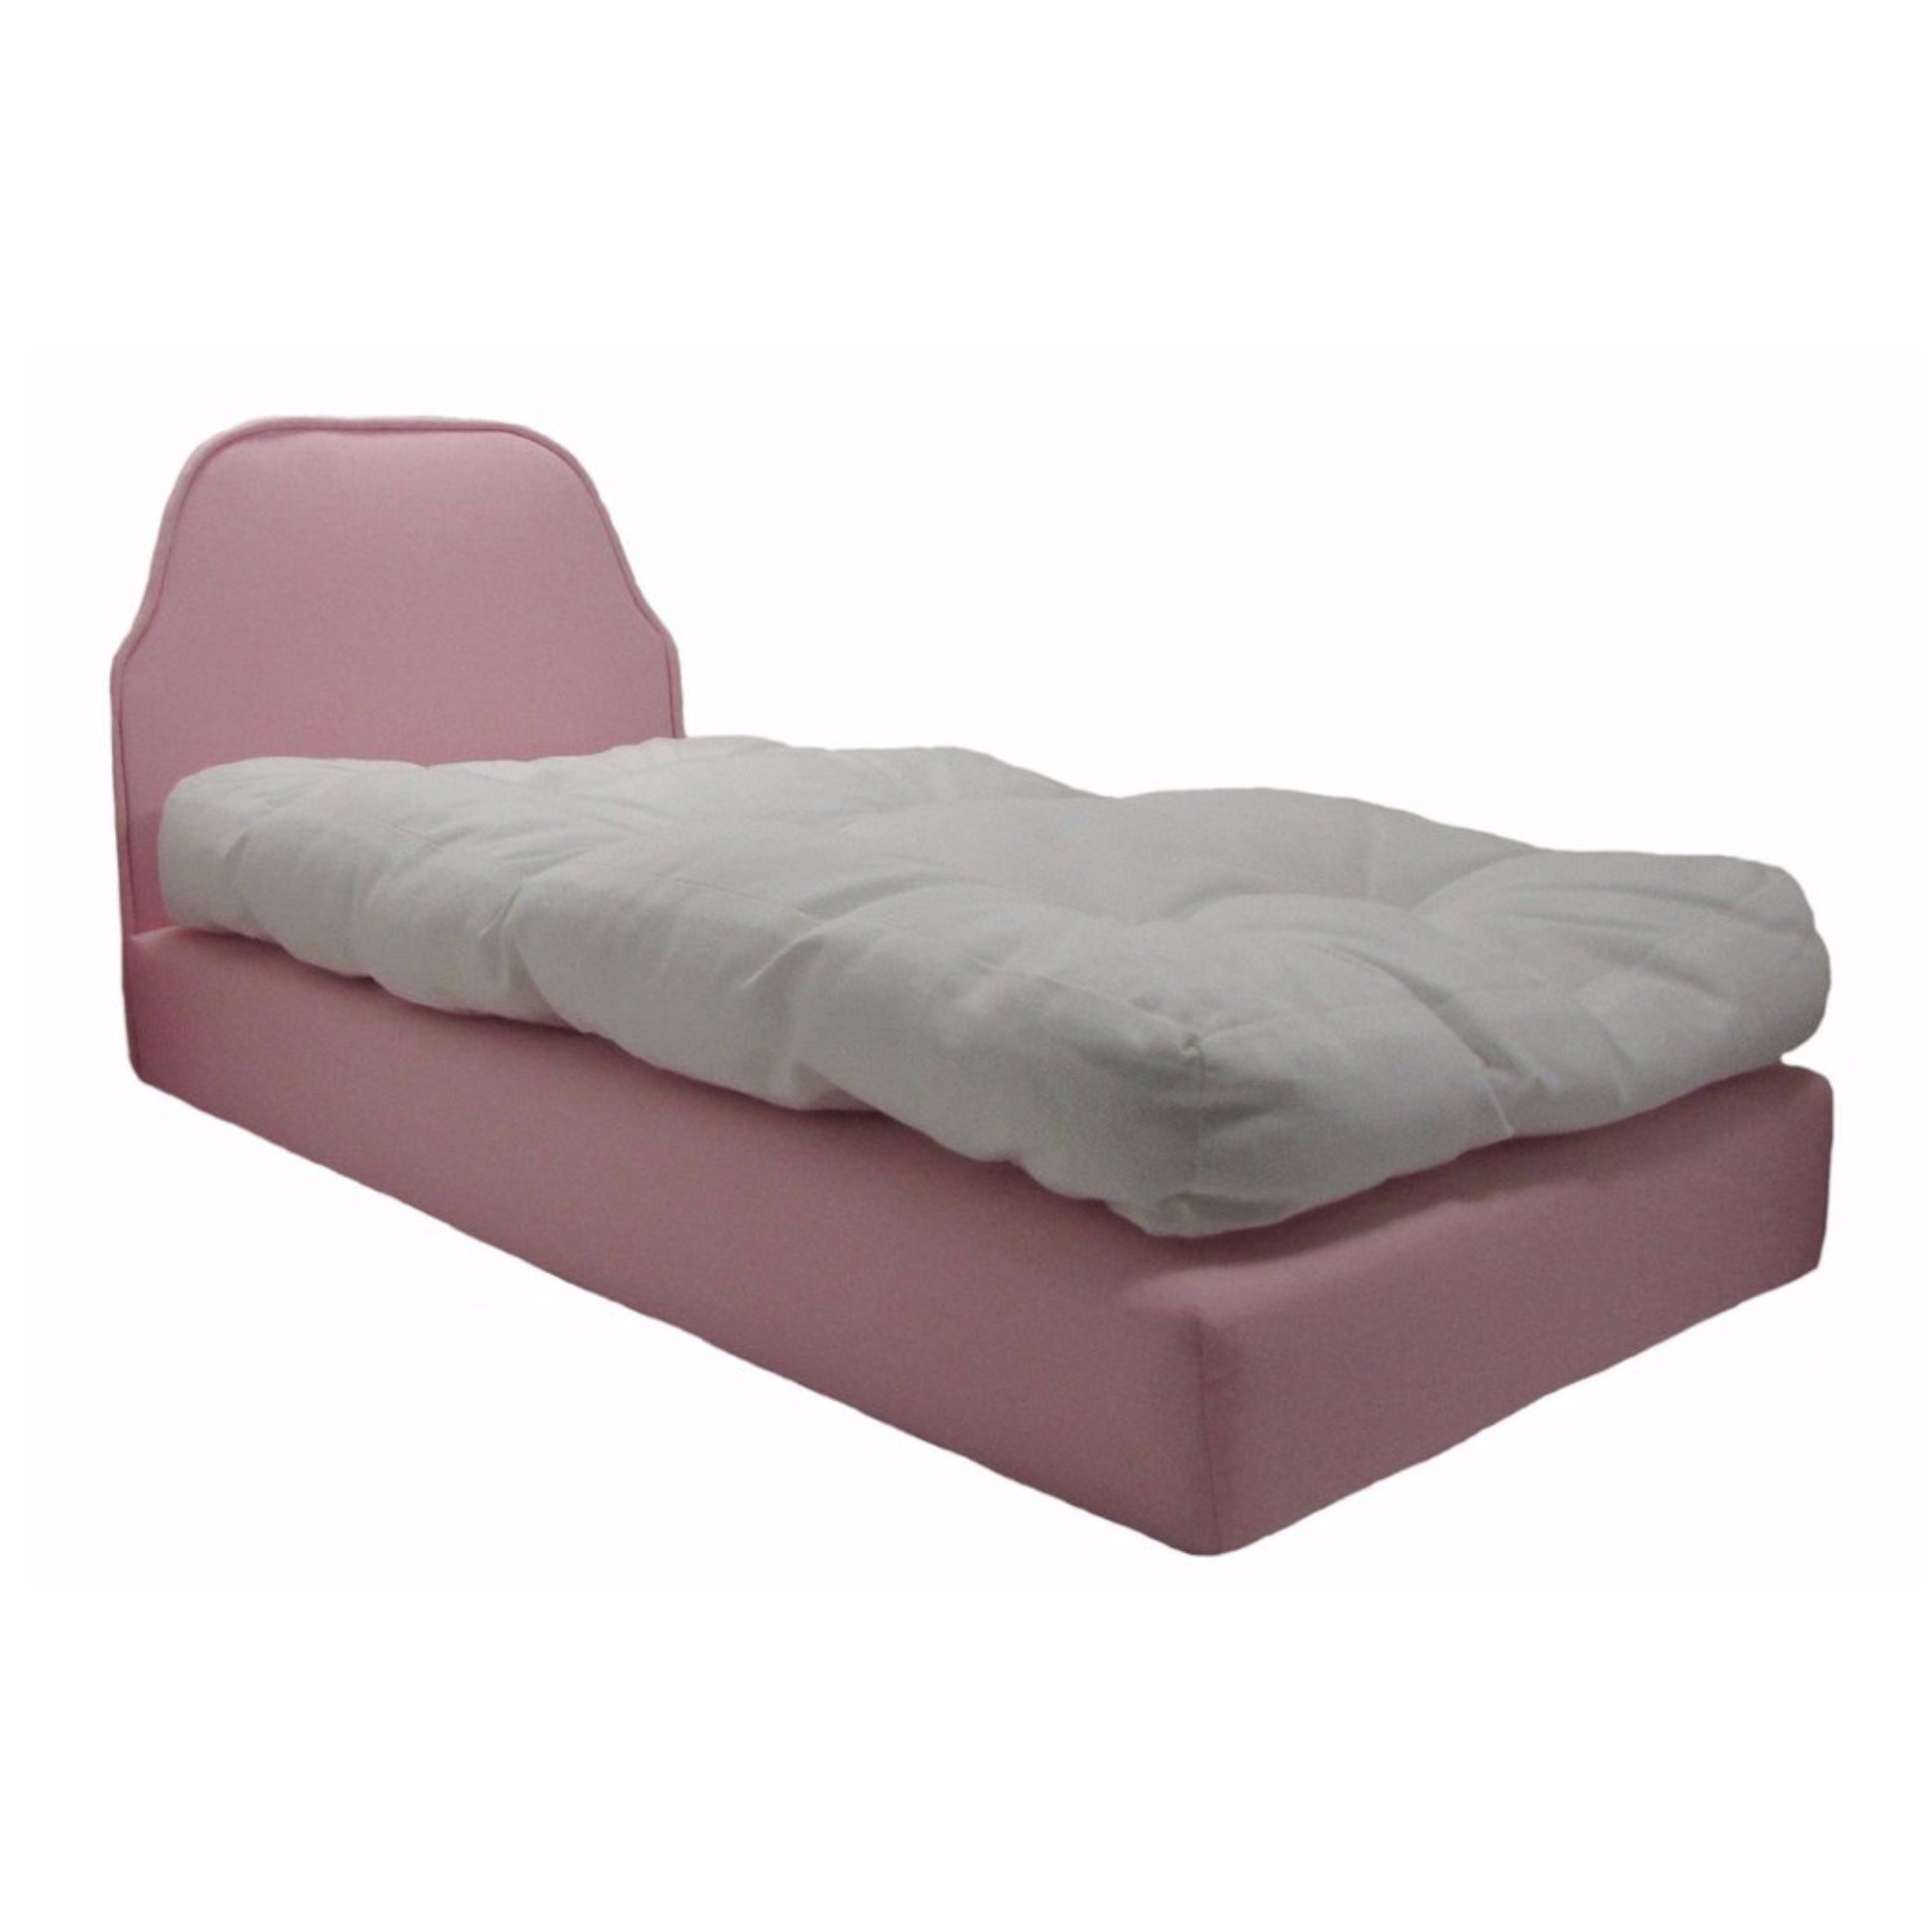 Light Pink Doll Bed for 18-inch dolls